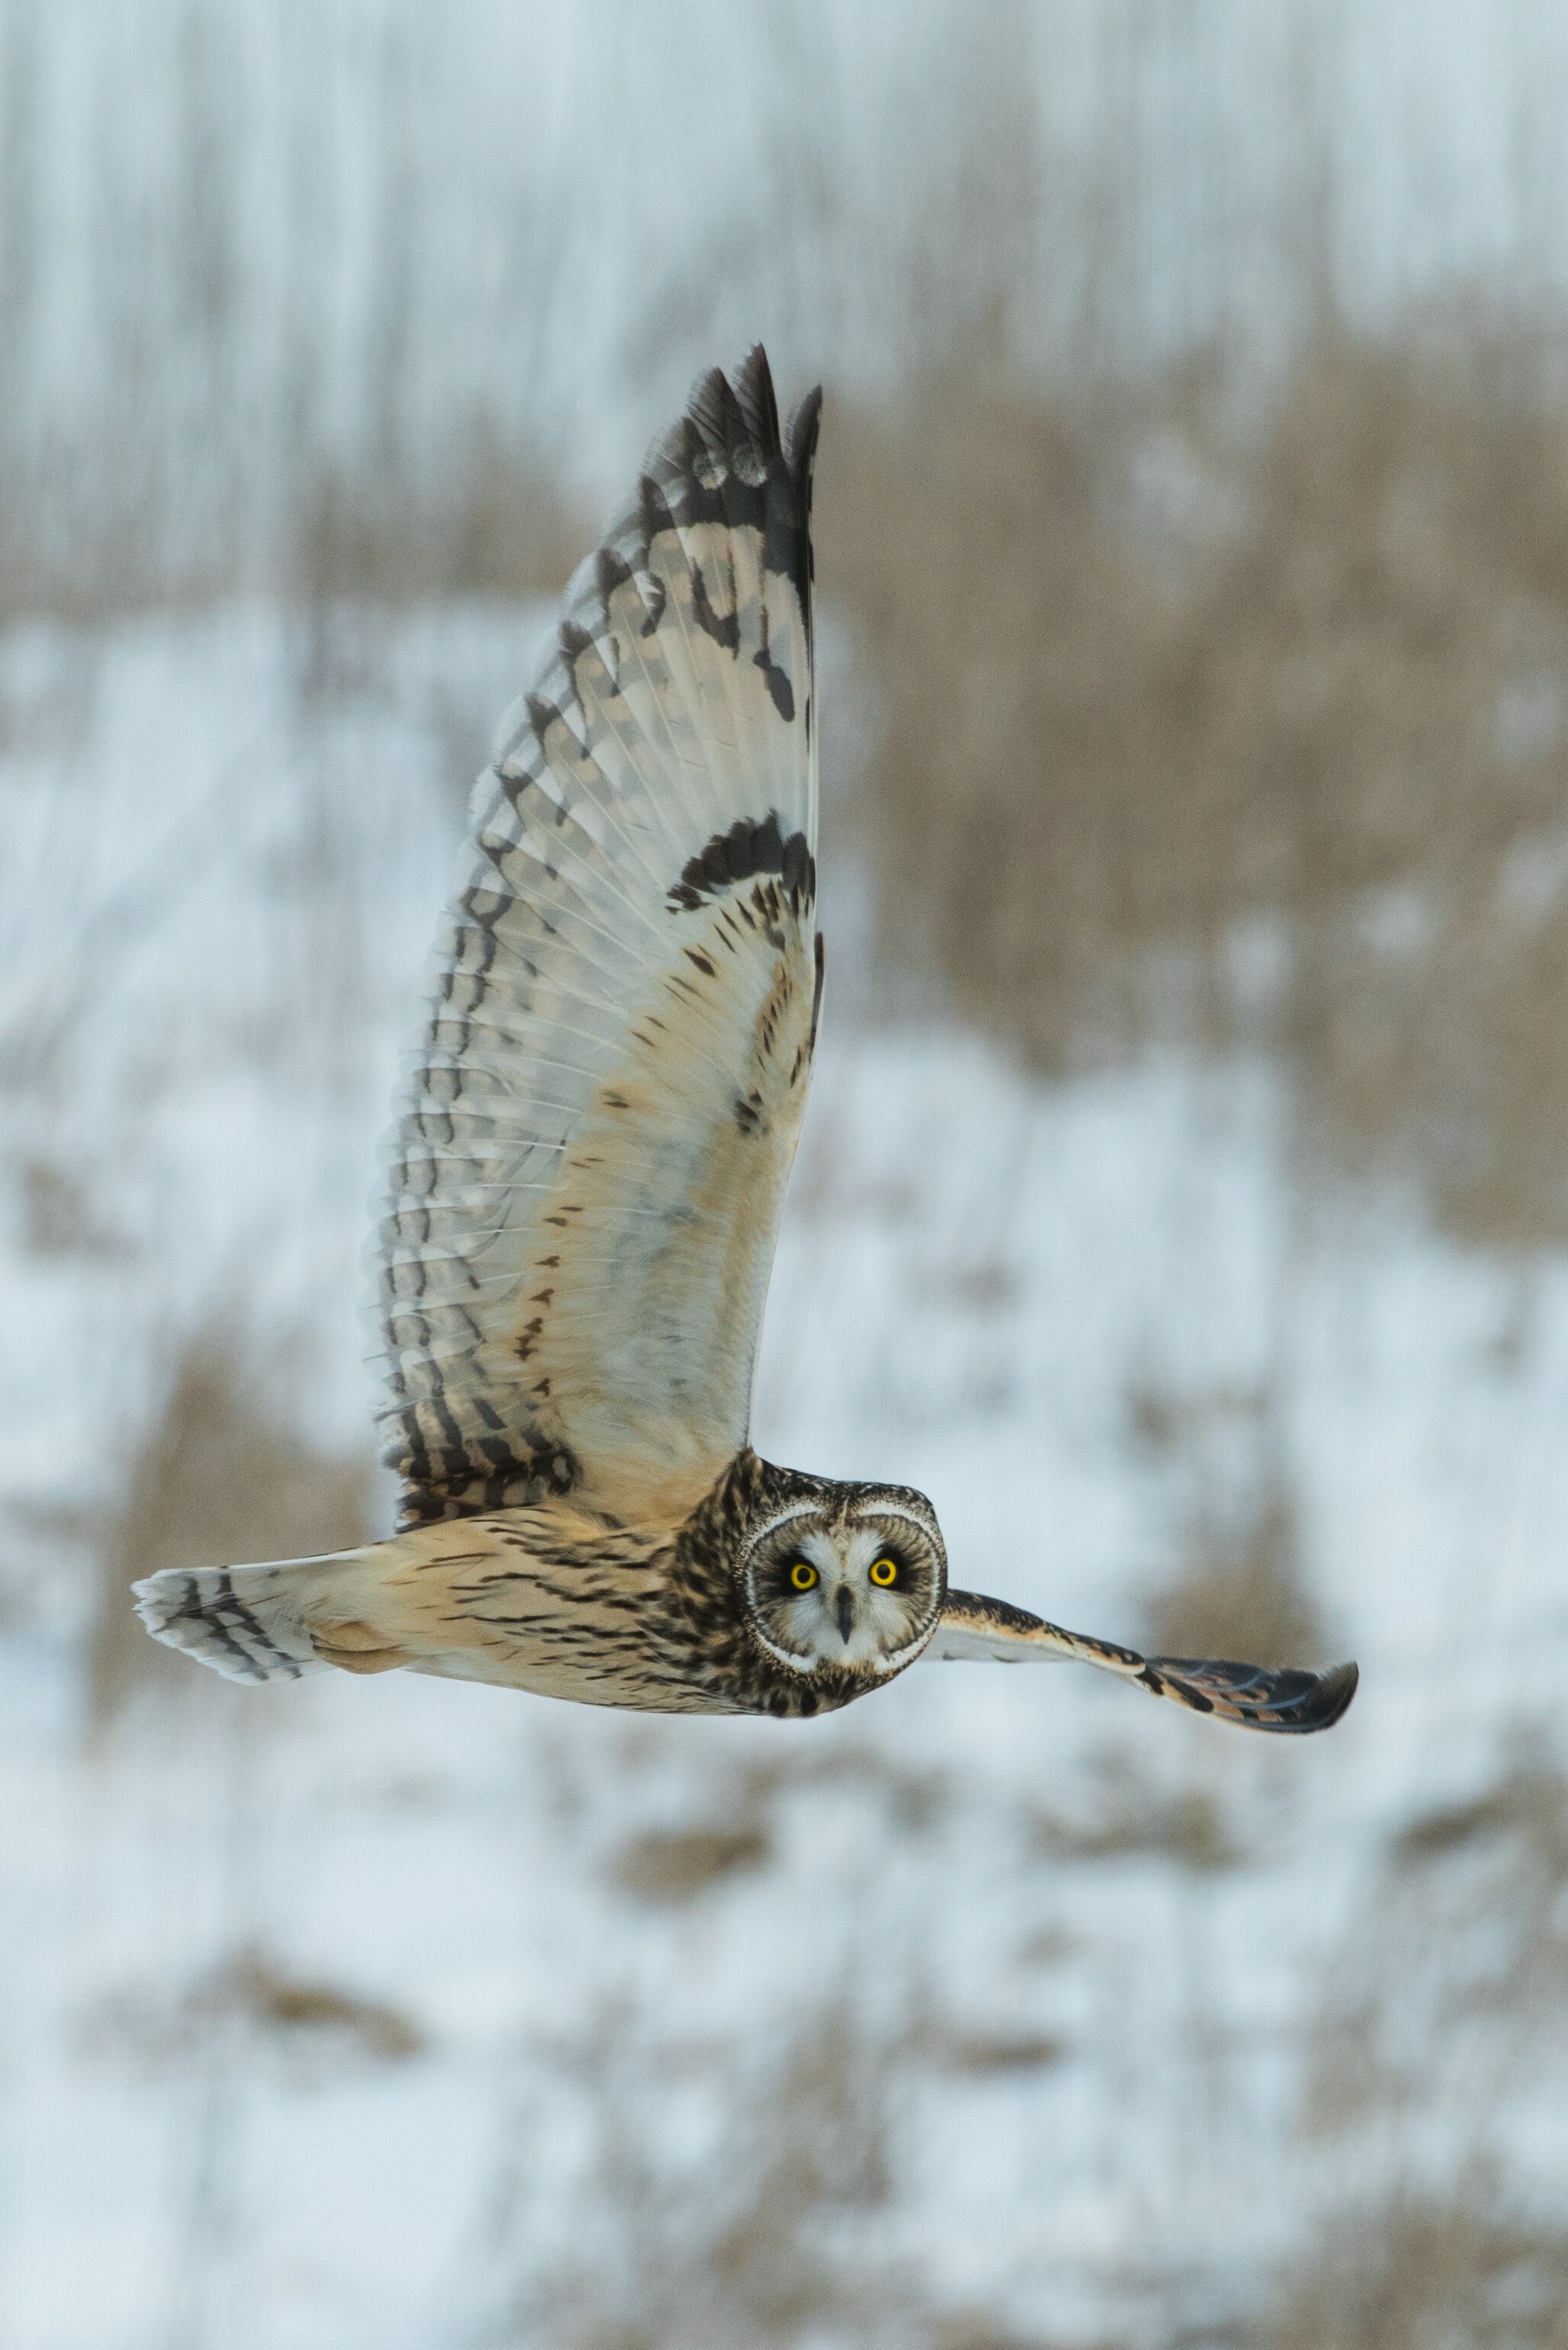 Owl: Their far vision, particularly in low light, is exceptionally good, Bird of prey. 2060x3080 HD Wallpaper.